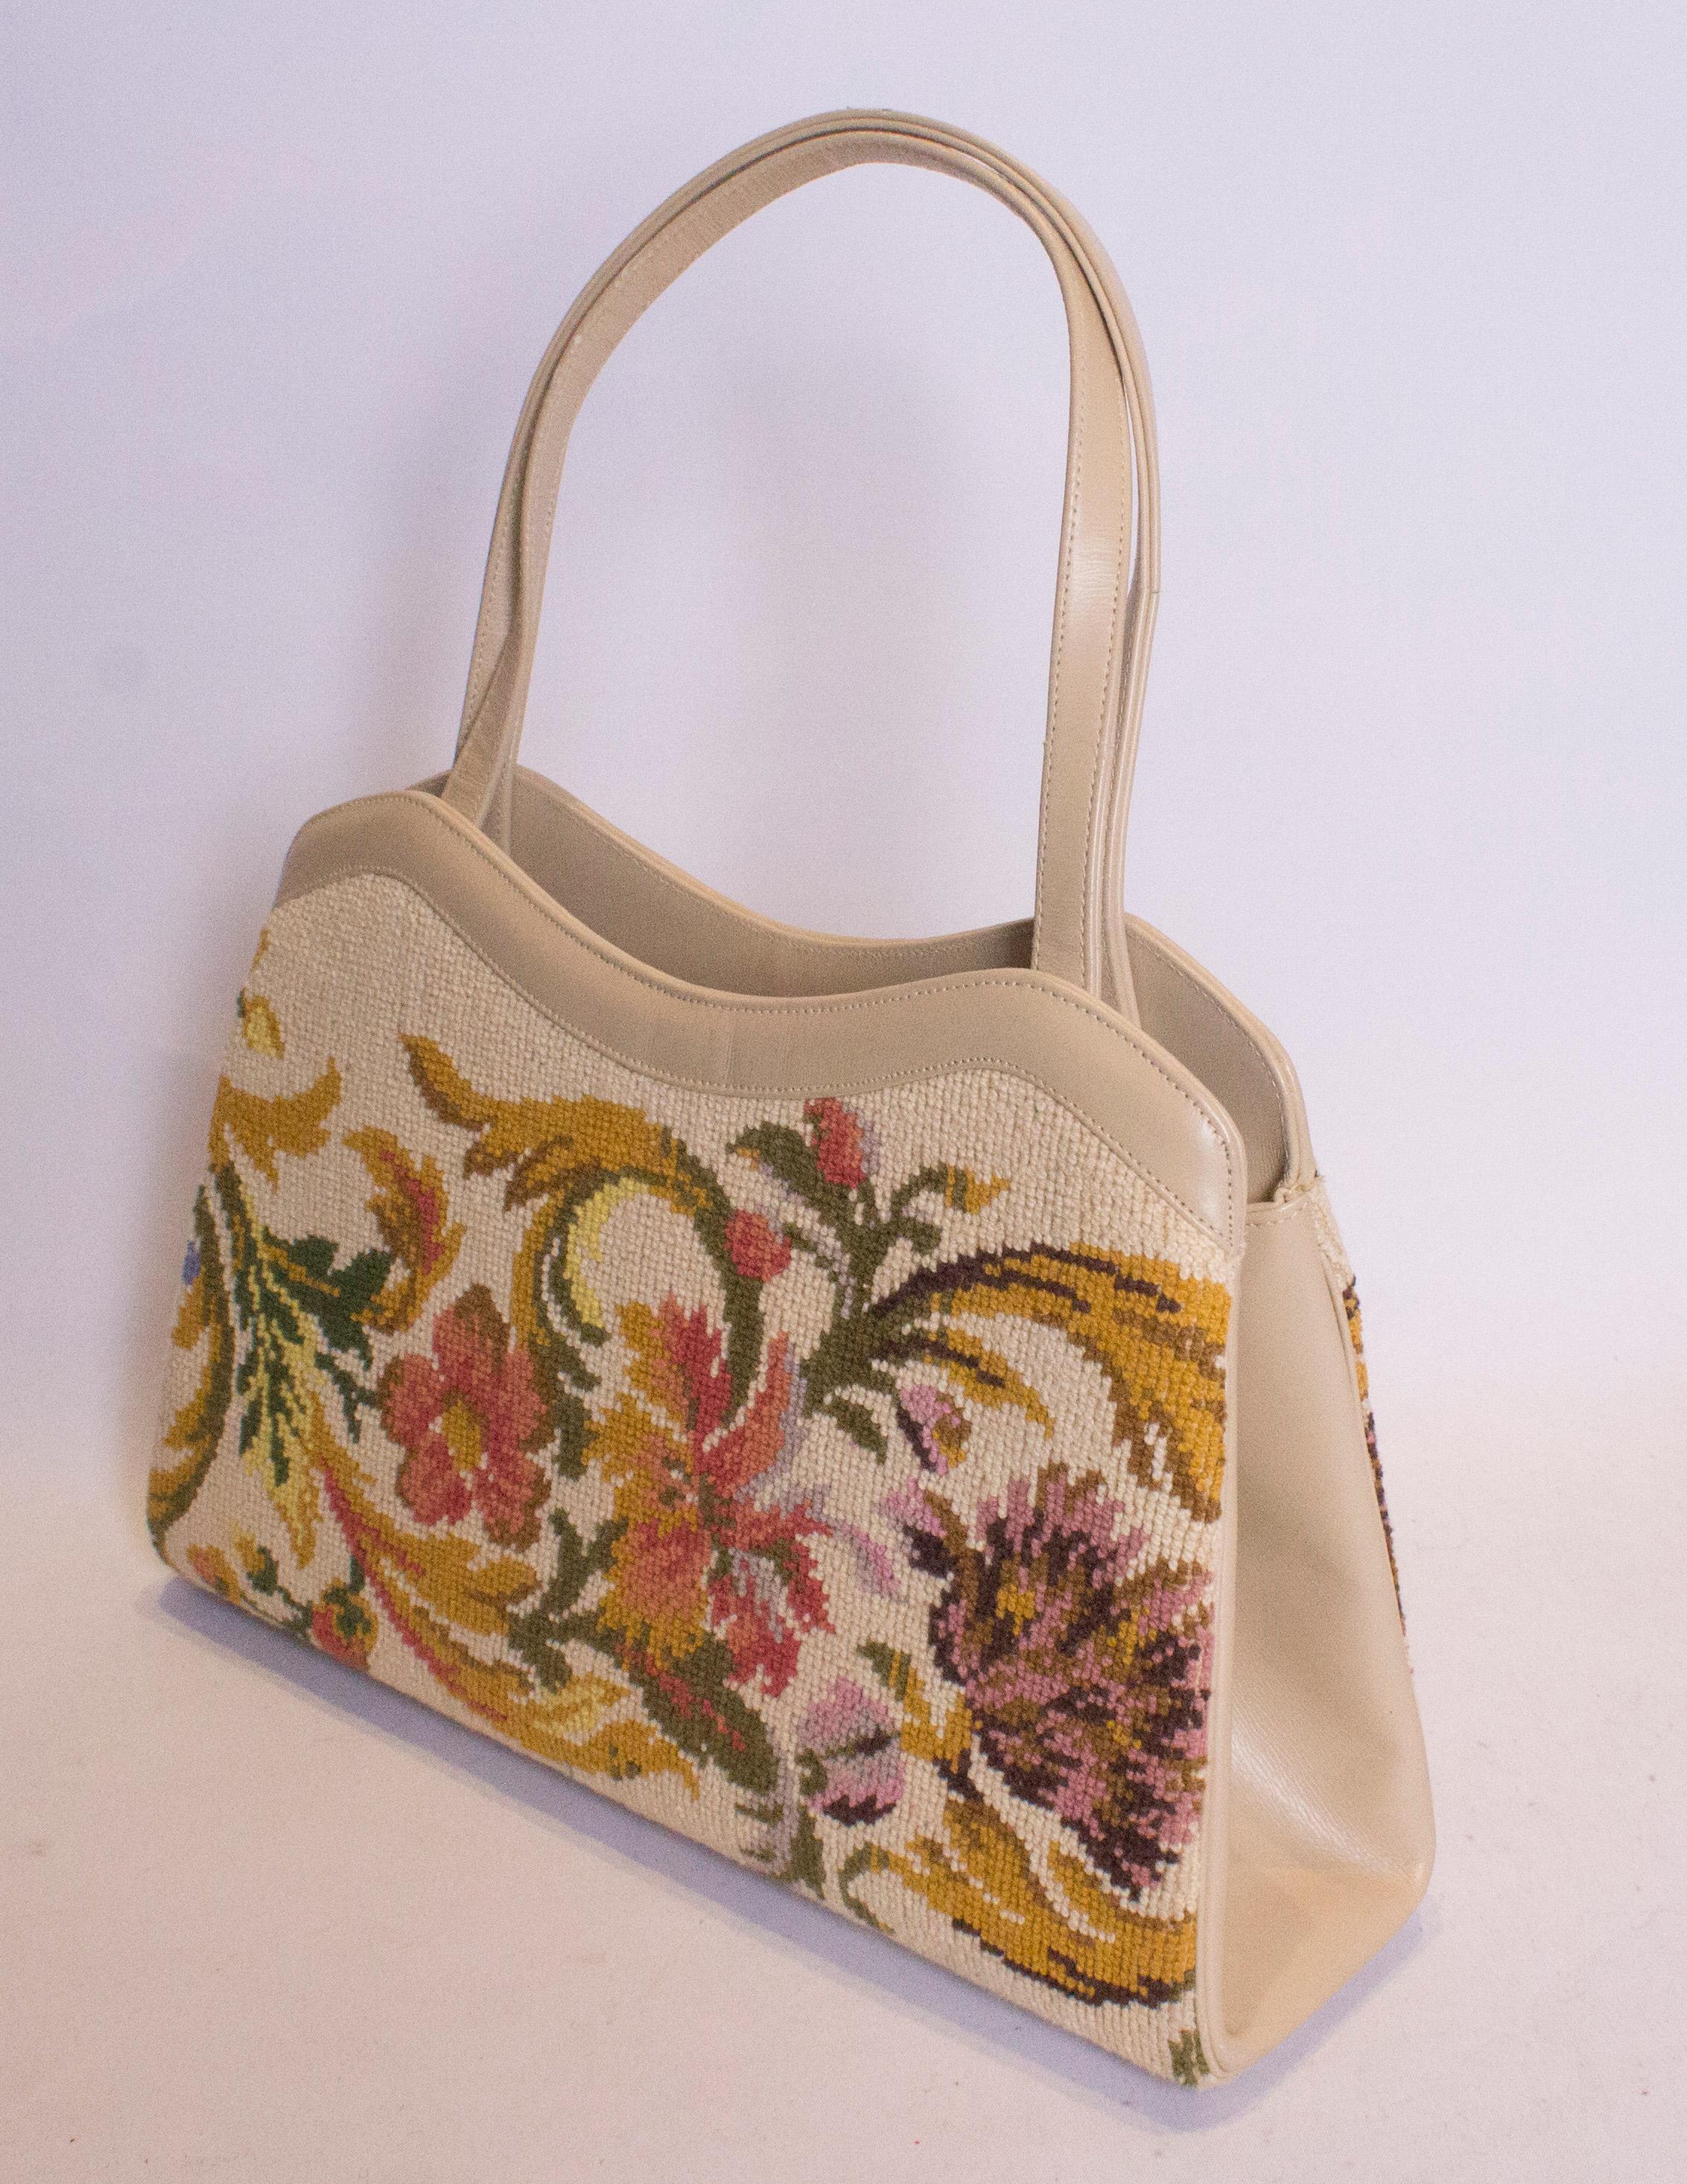 A pretty bag for Fall. The bag is a useful size, with a pretty scalloped top. Internally there is one zip compartment
Measurements:  width 13'', height 8'', depth 3 1/2''